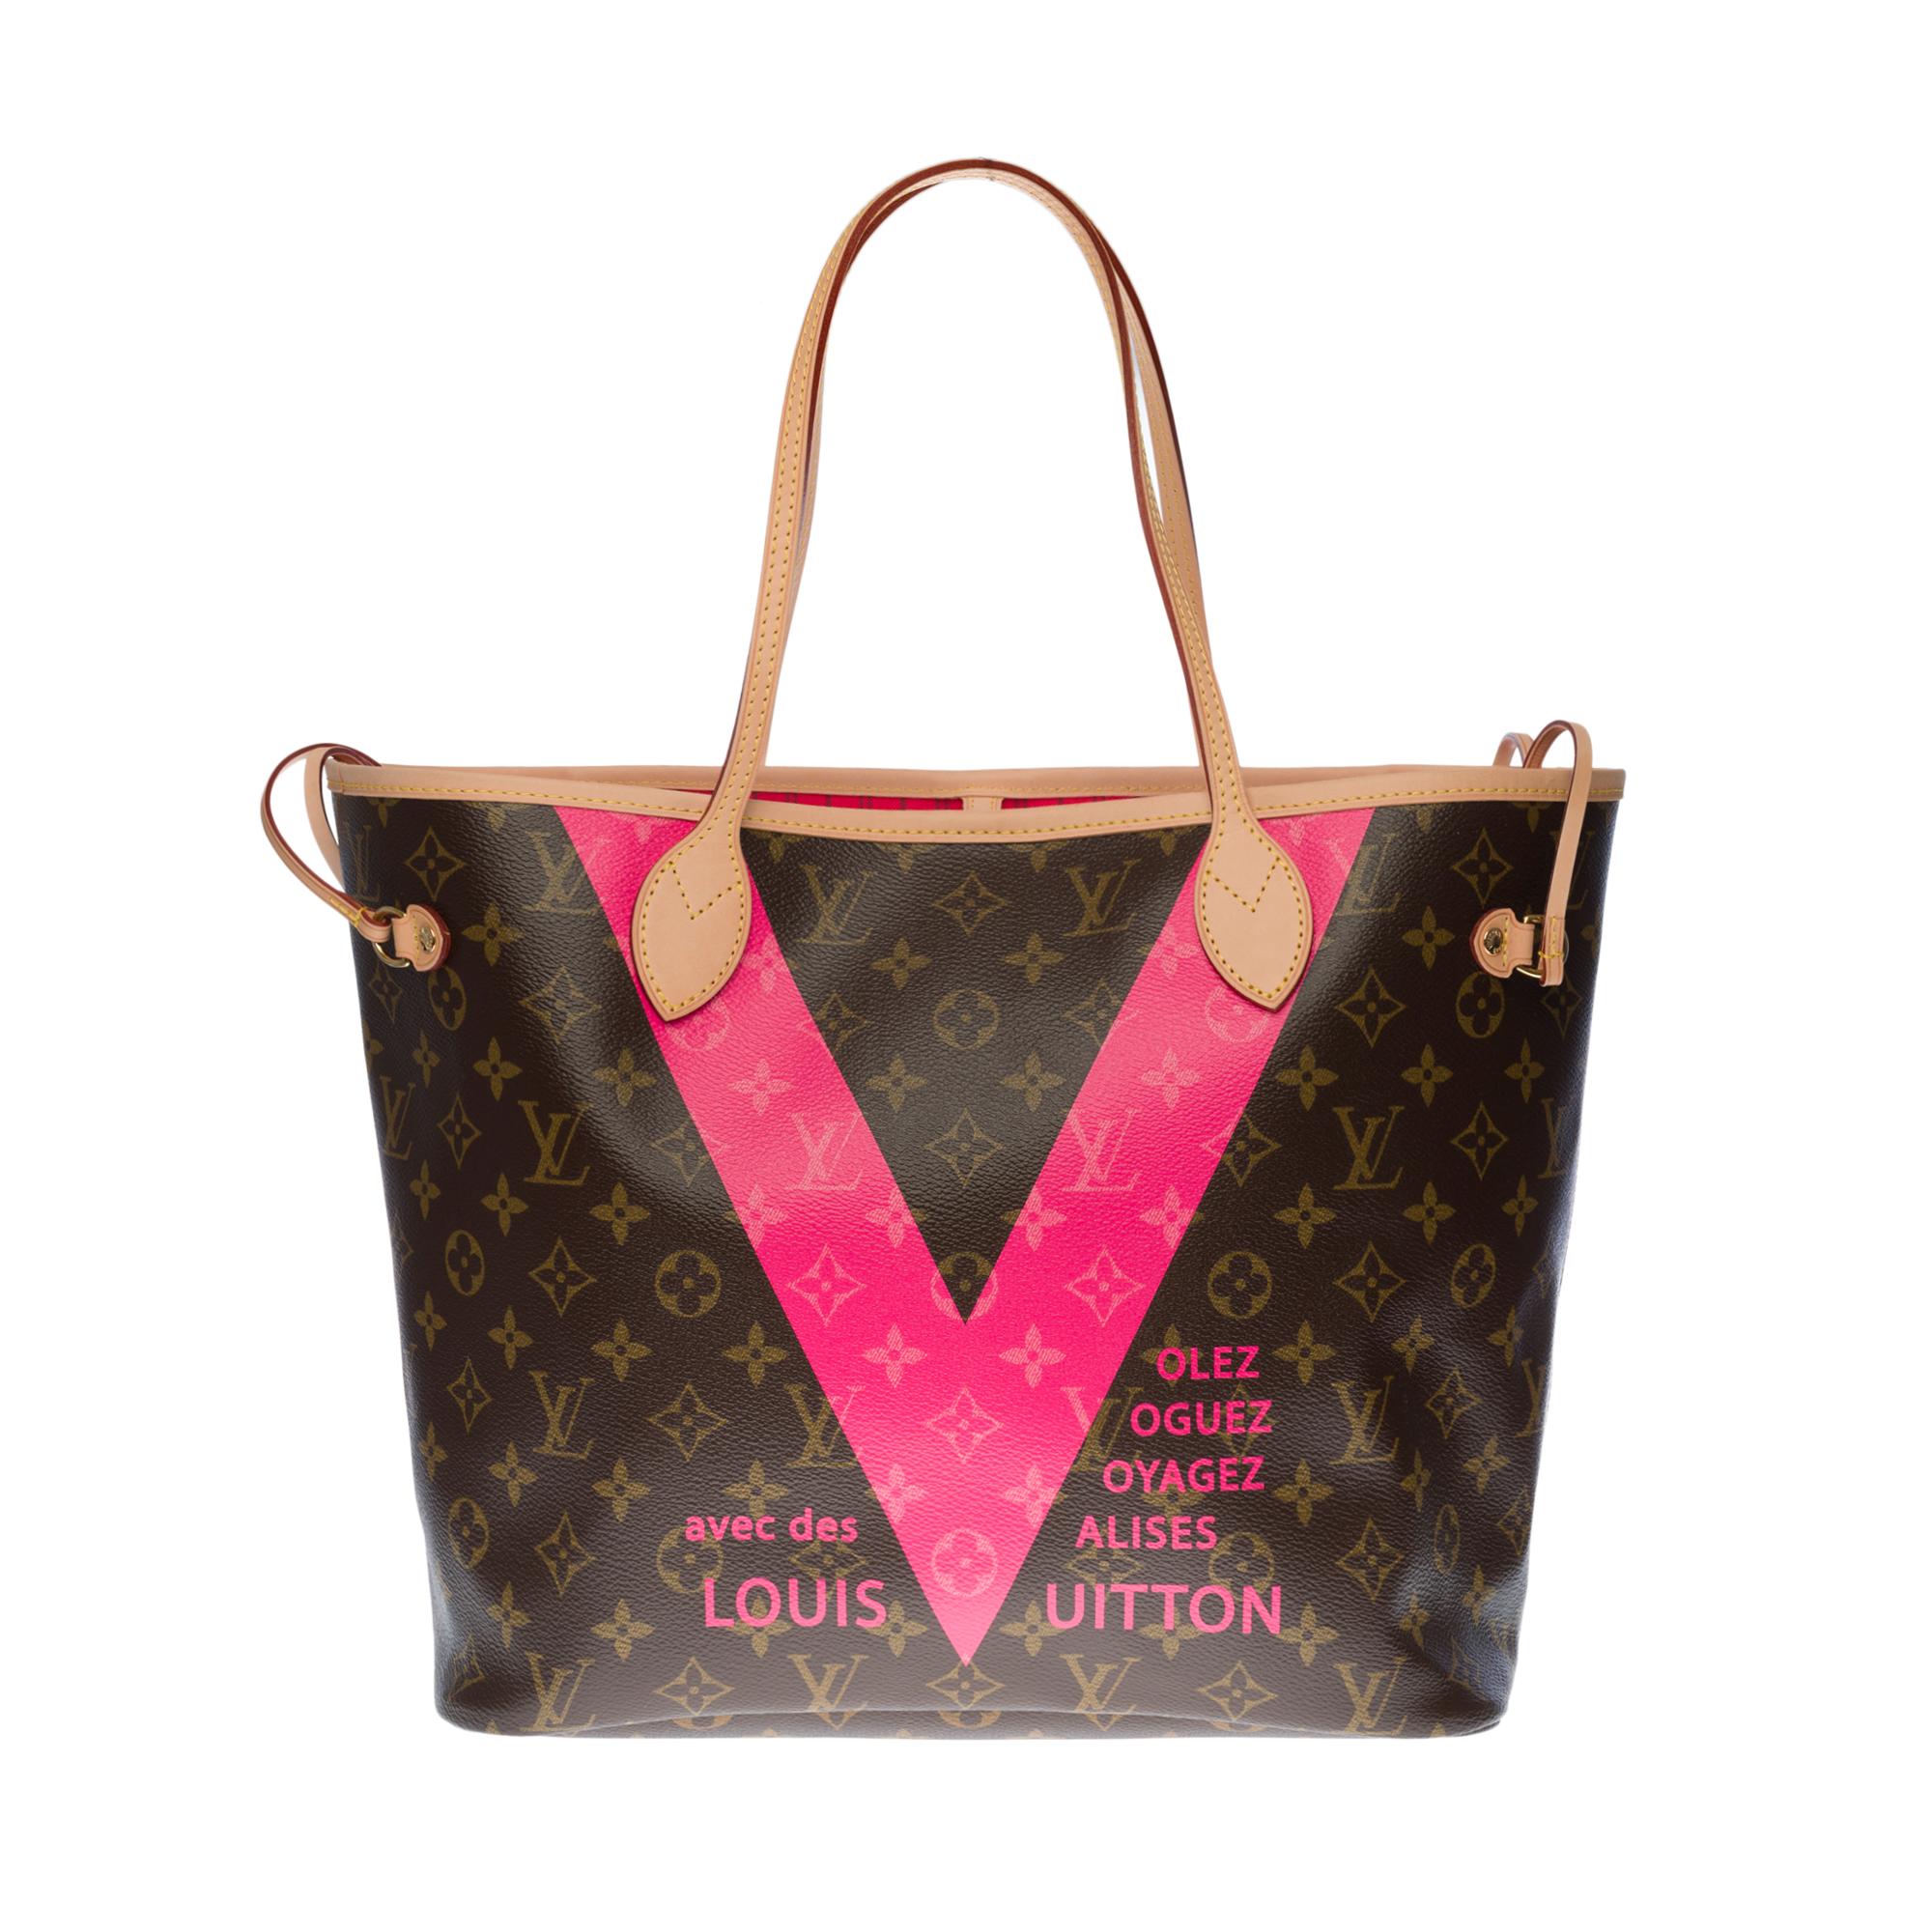 COLLECTOR (Only 250 pieces over the world) -  Limited Edition Saint-Tropez Fuchsia 2016

 Superb Louis Vuitton Neverfull MM Monogram Canvas Tote Bag Limited Edition V Fuchsia 